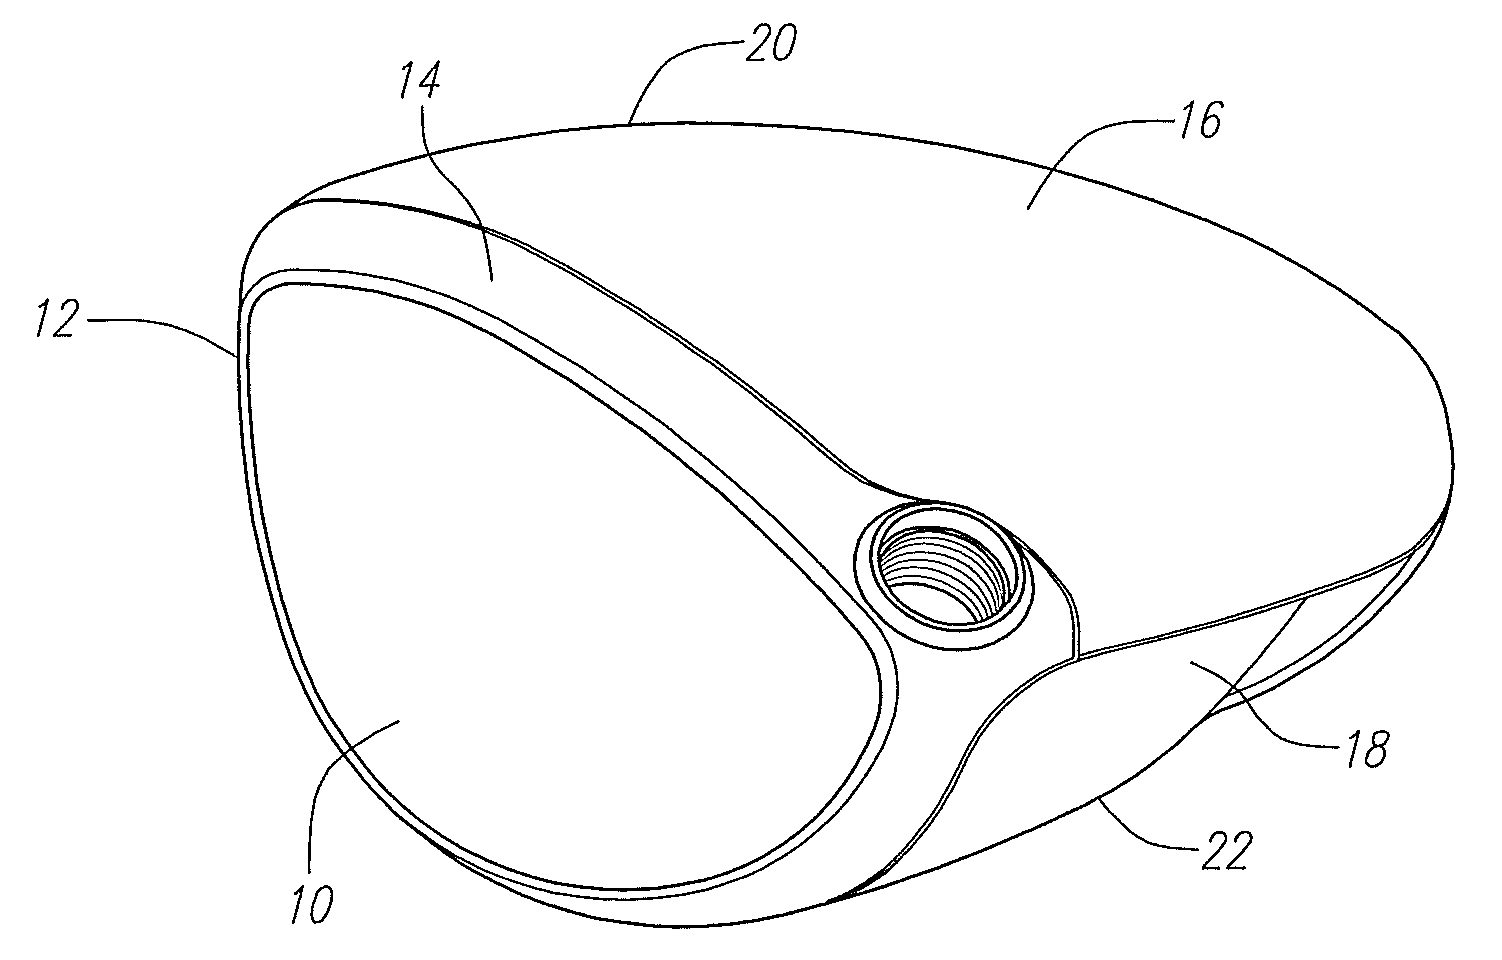 Method for forming a multiple material golf club head